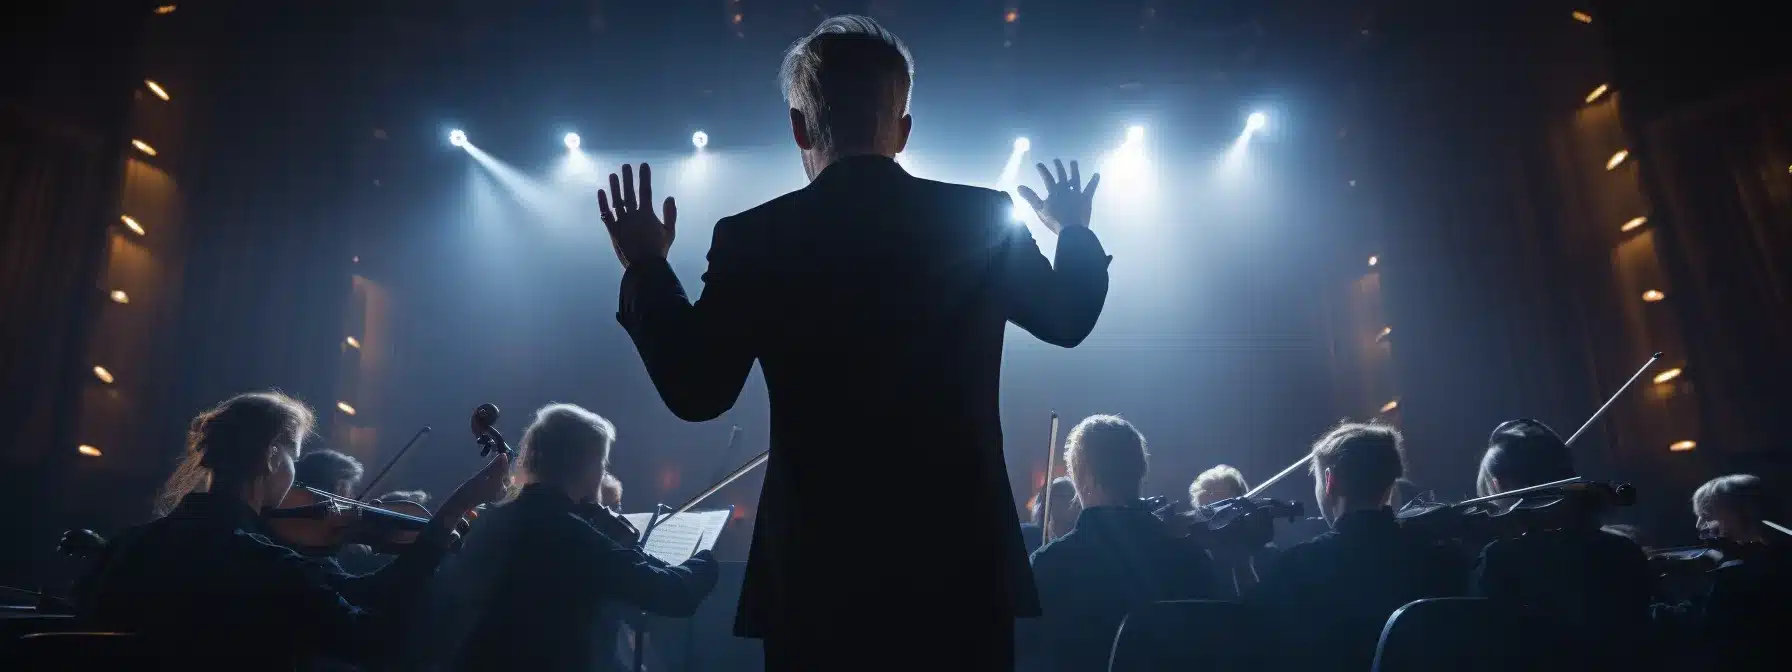 A Conductor Leading An Orchestra In A Synchronized Performance.